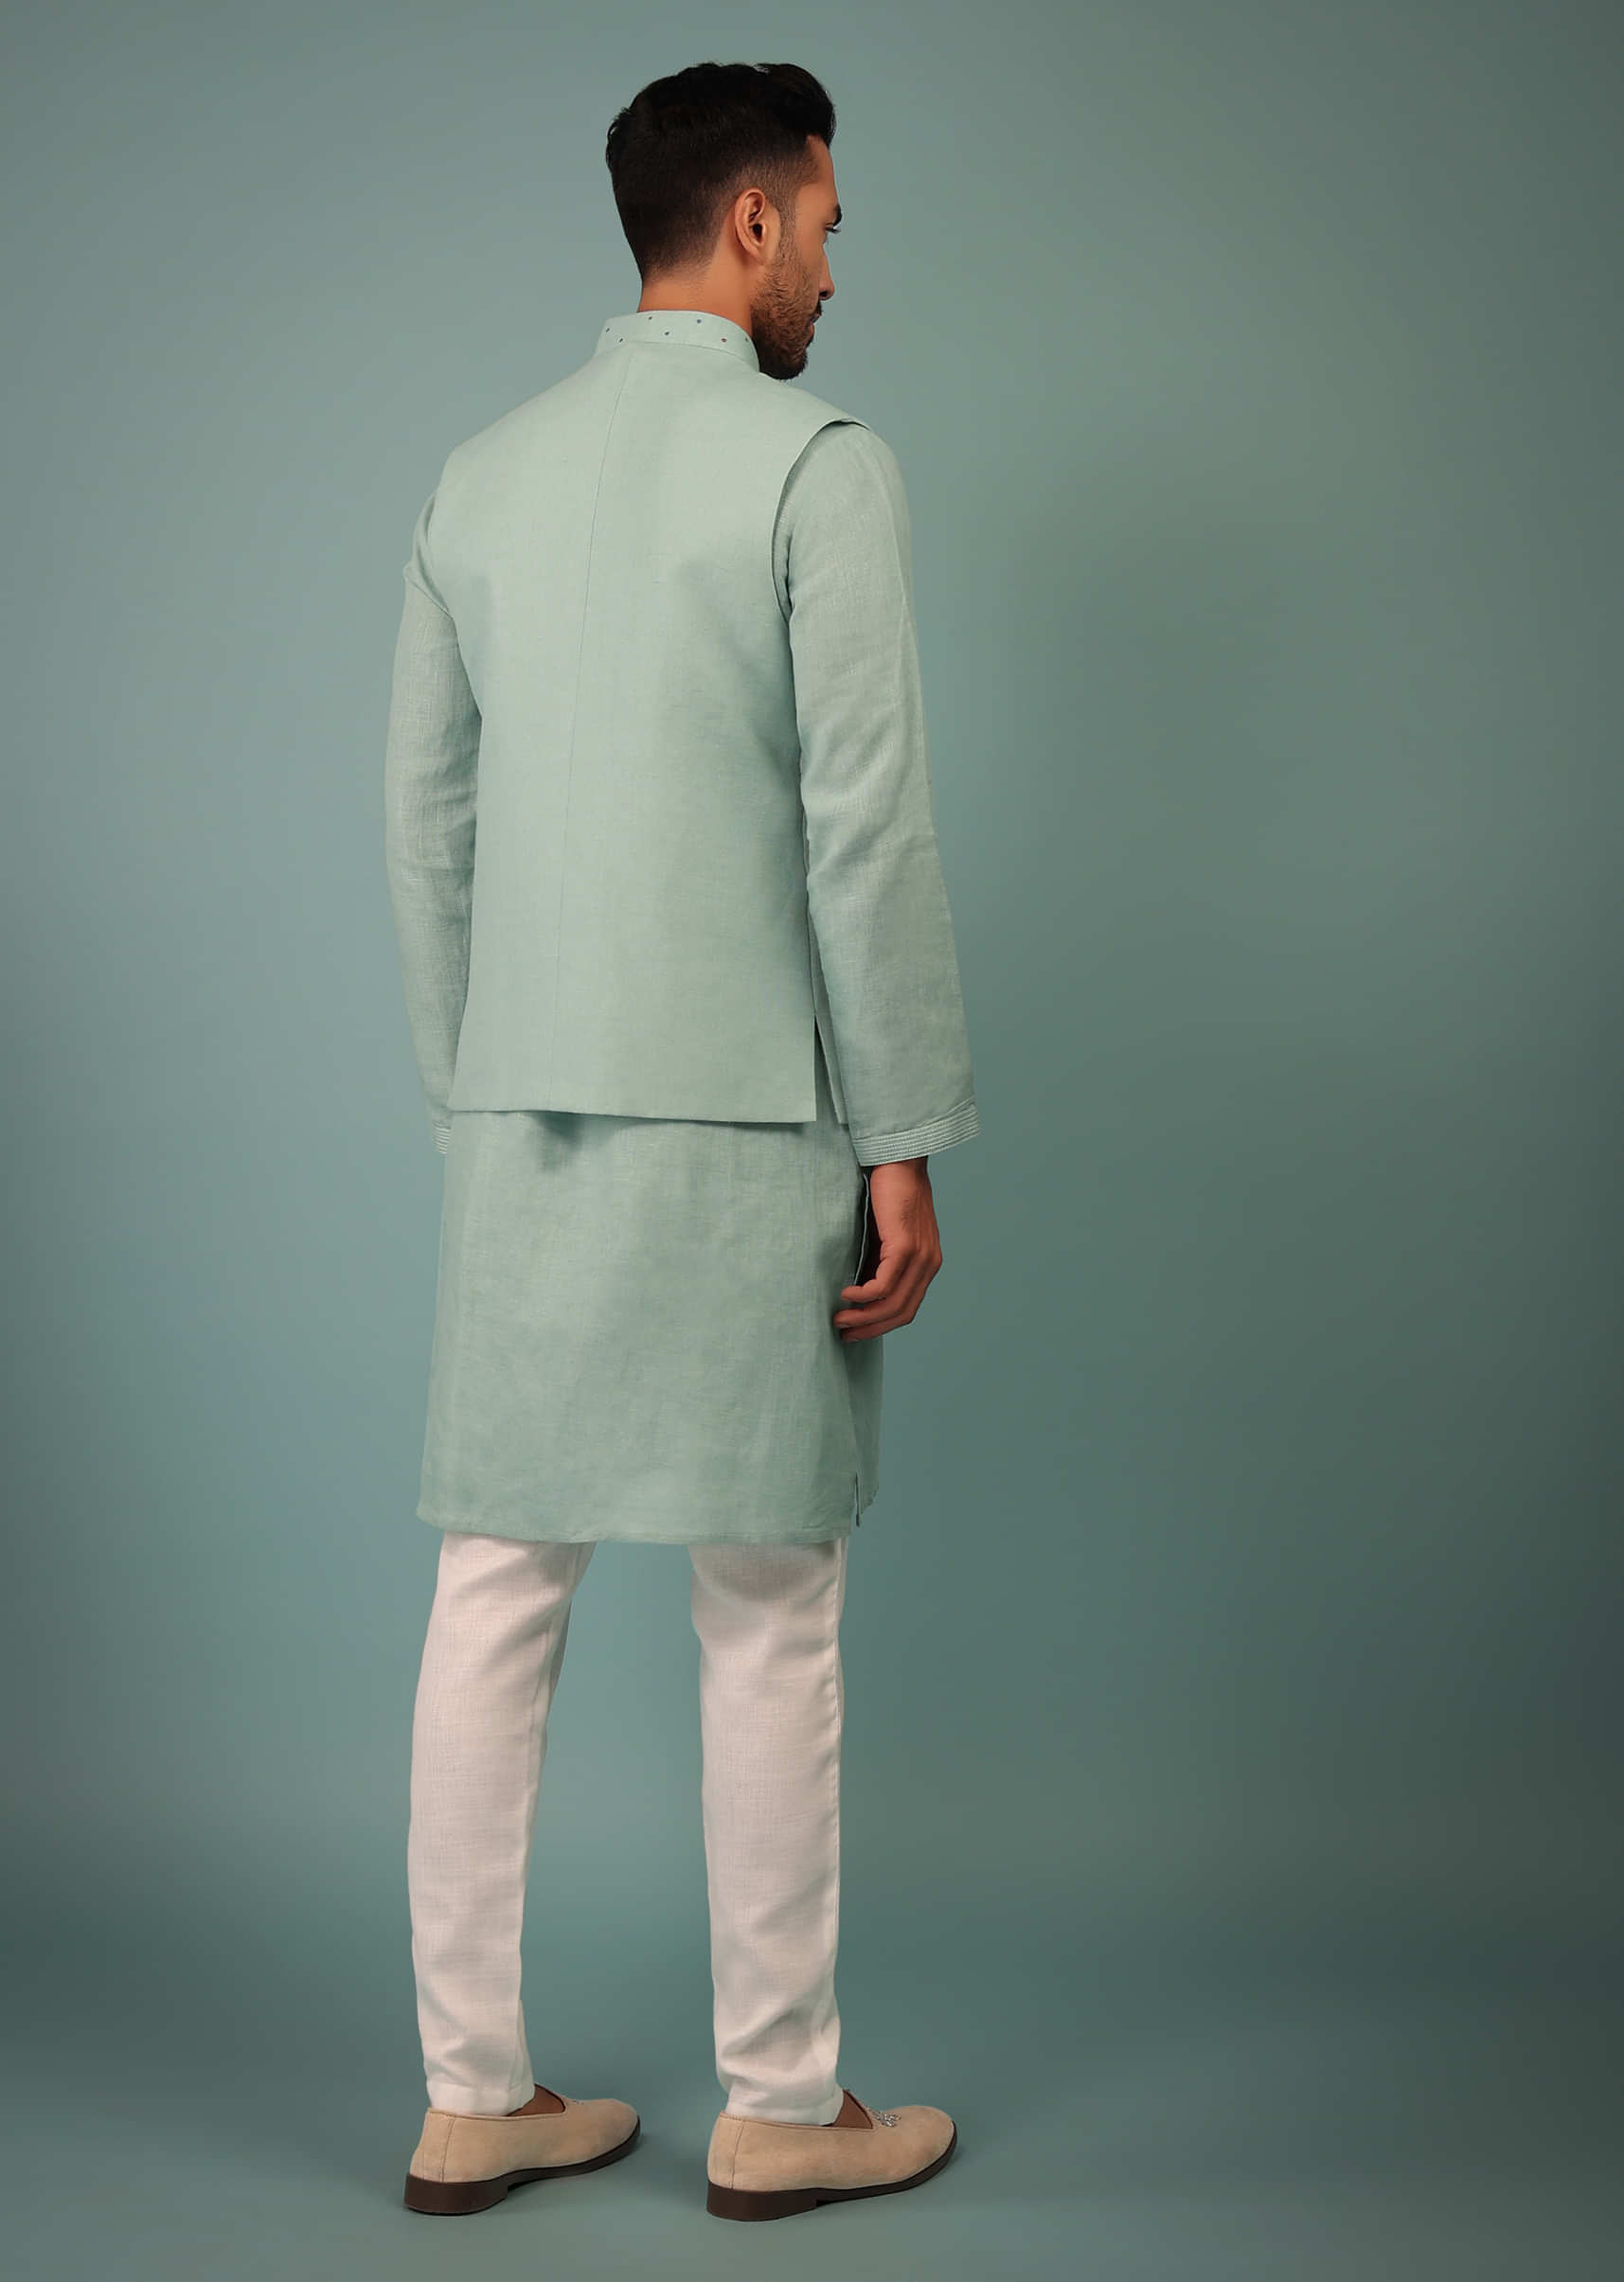 Sea Green Bandi Jacket Set In Linen With Blooming Floral Embroidery